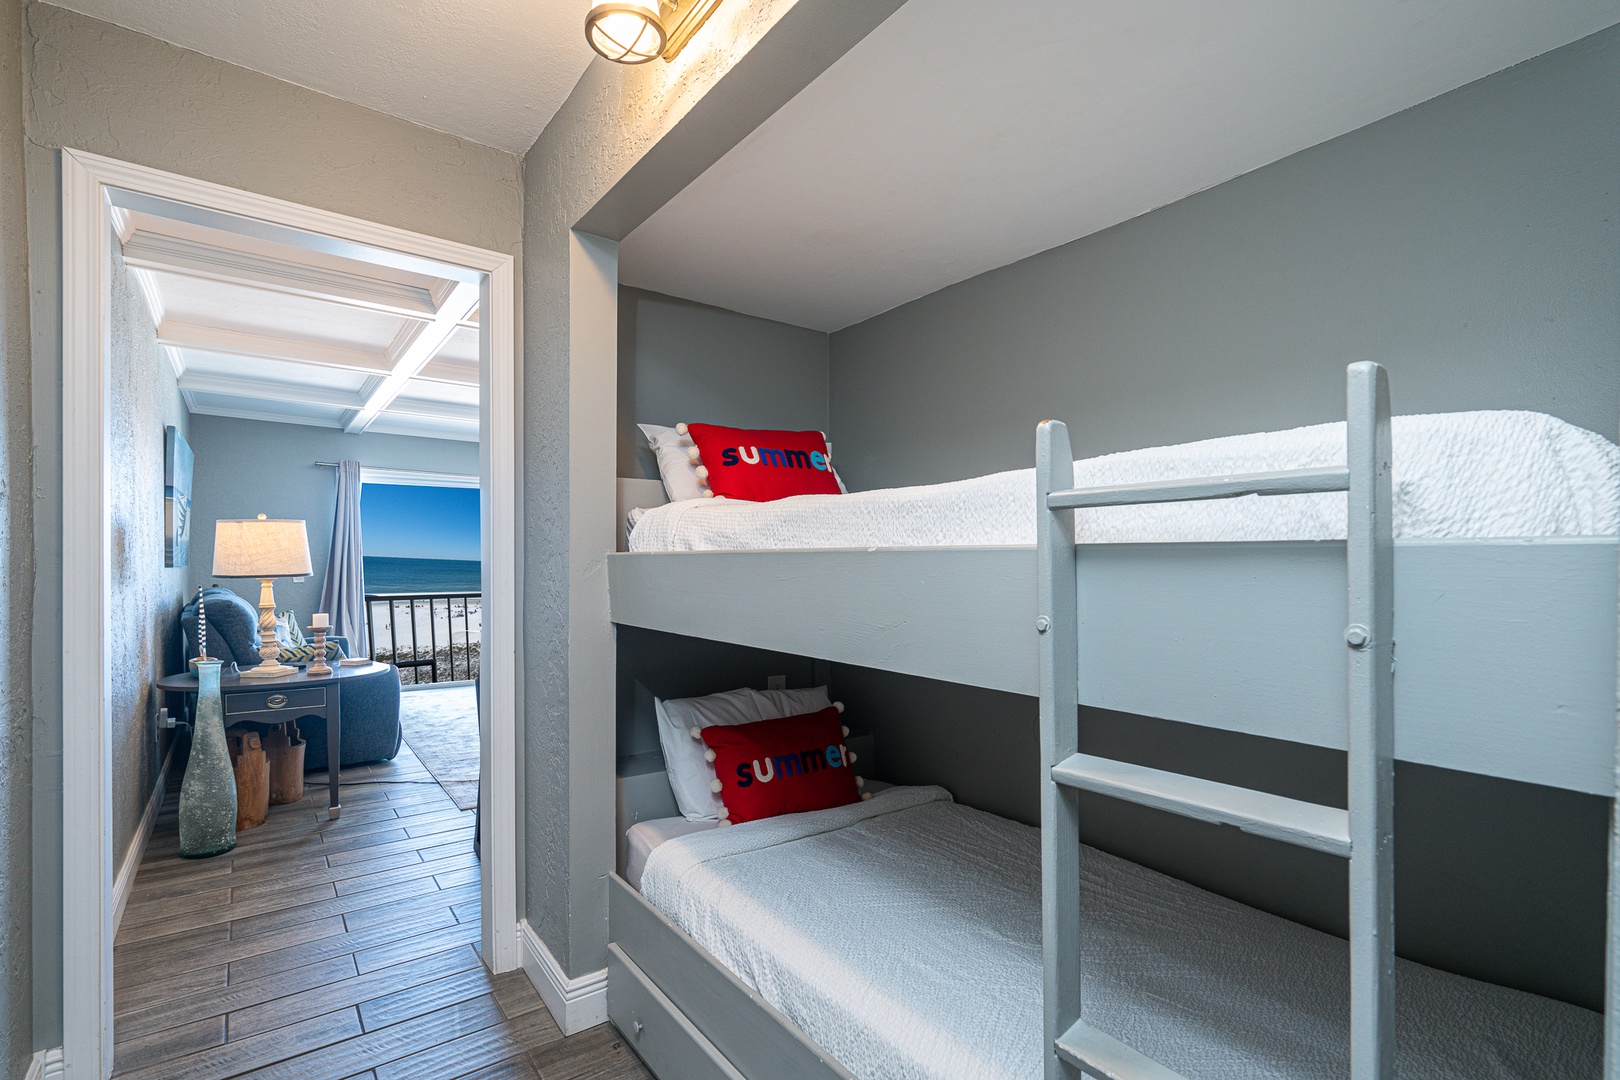 The entry hallways contain a double twin bunk bed